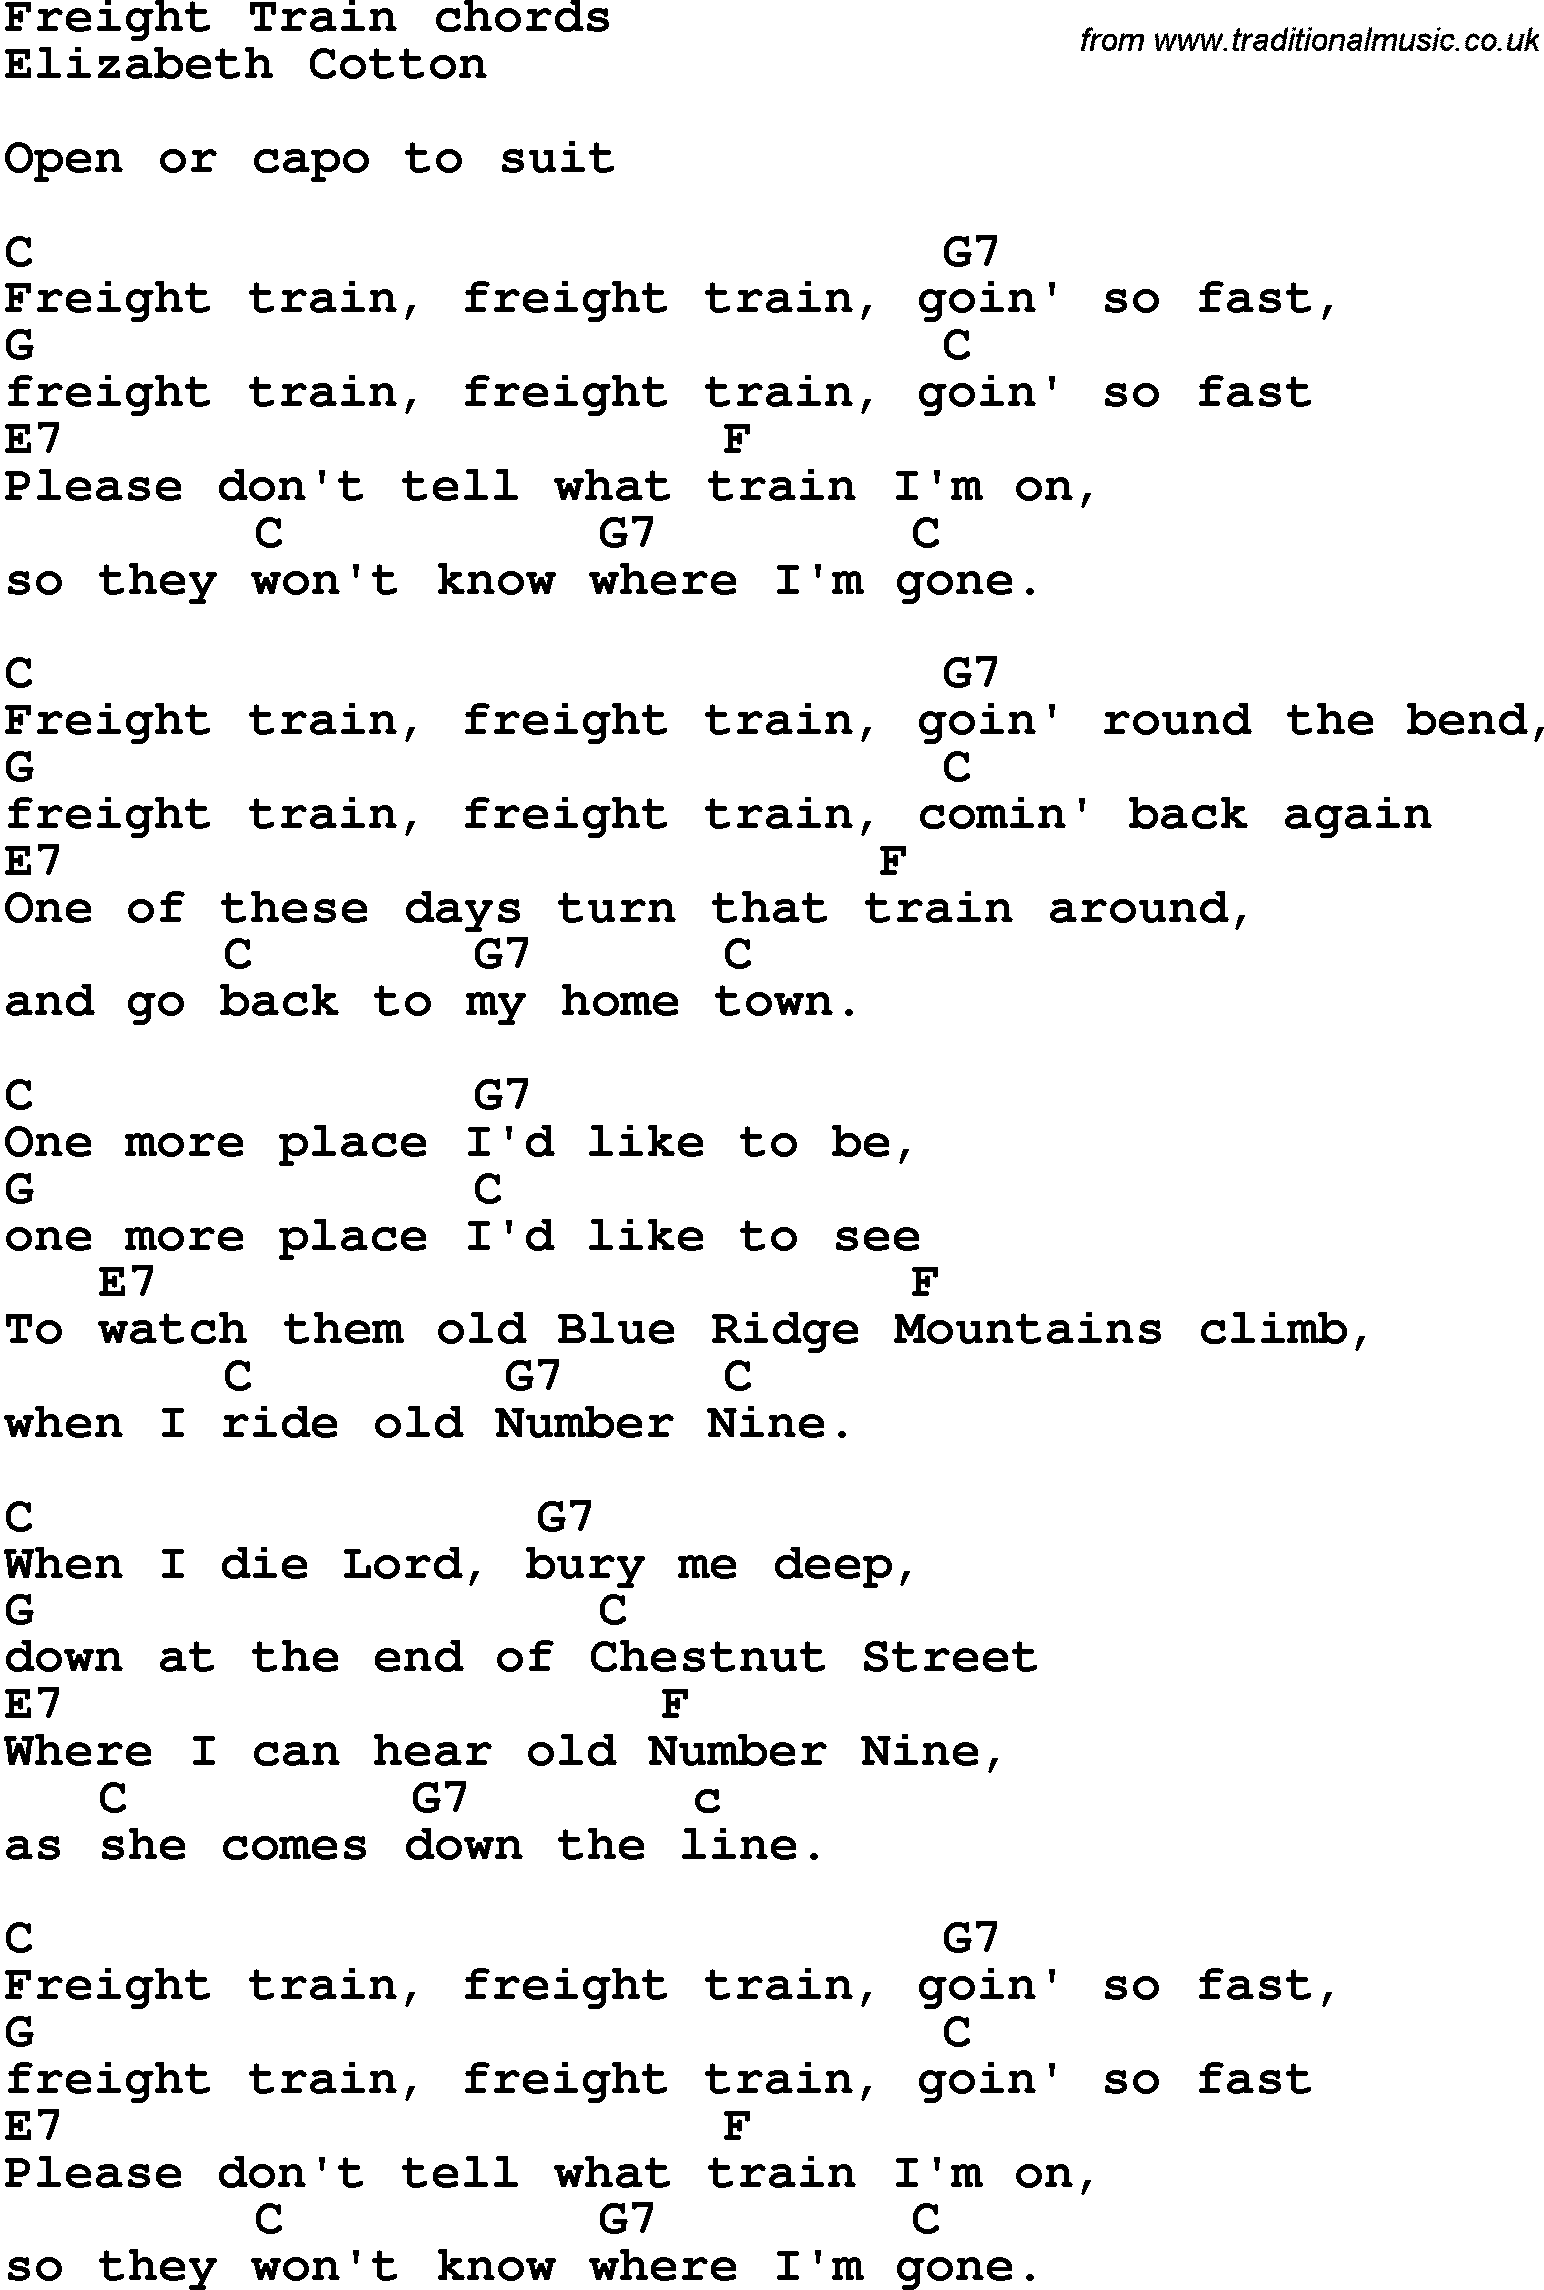 Song Lyrics with guitar chords for Freight Train